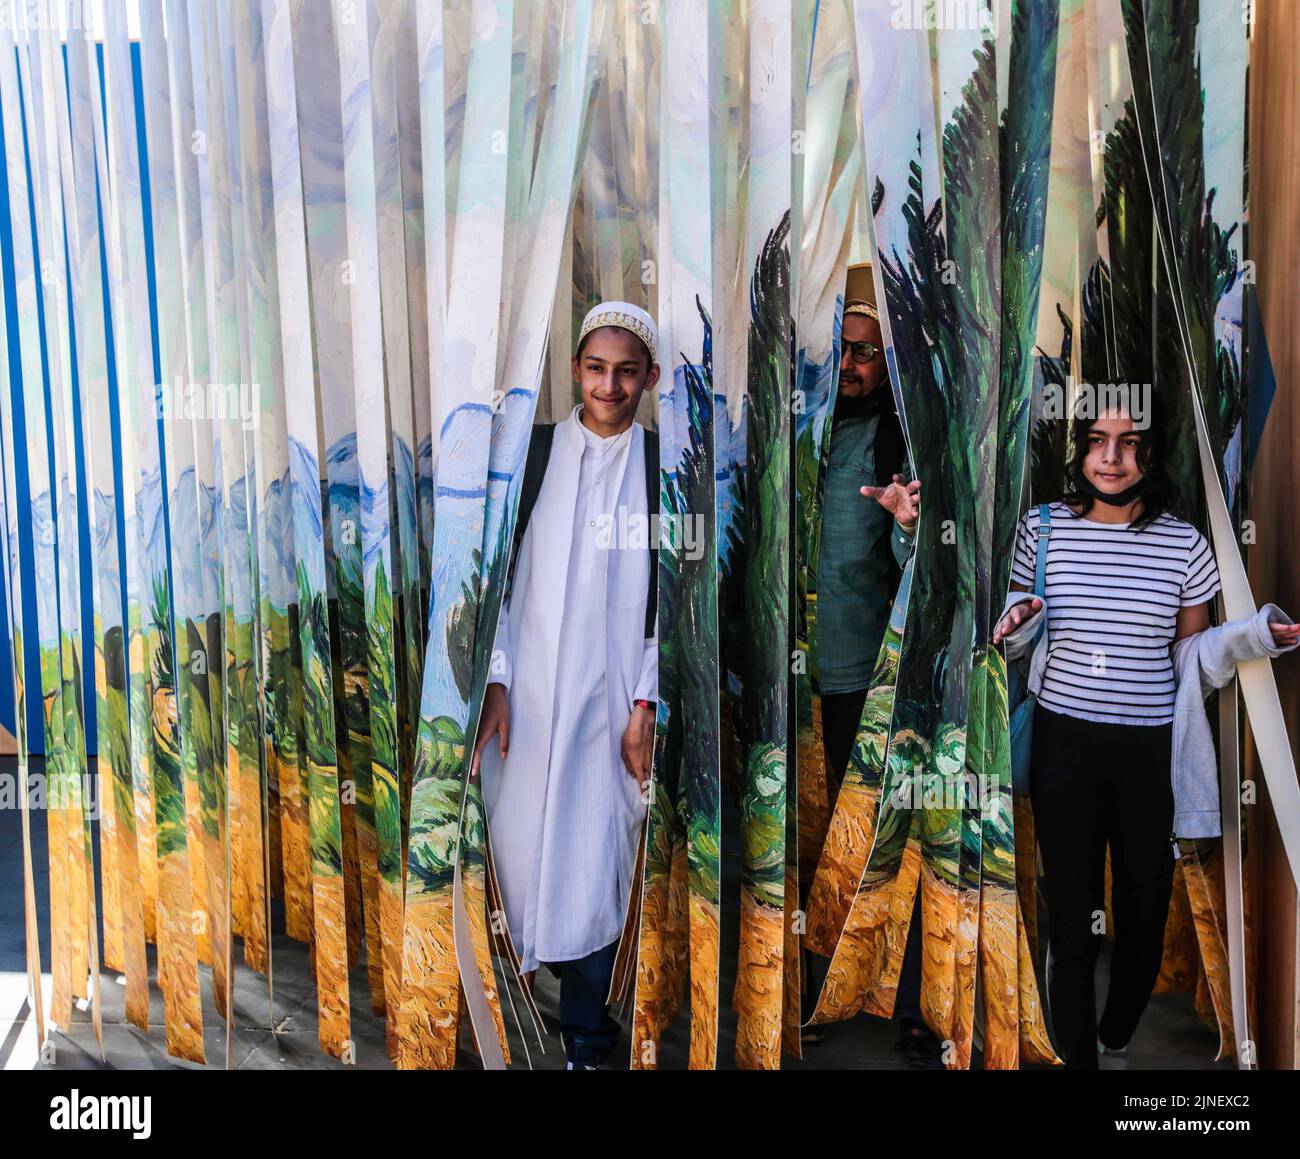 London UK 11 August 2022 Cypresses the late 19th-century painting by Dutch artist Vincent van Gogh painted around June 1889. Done in oil on canvas, has been cut in hundred of stripes ,were visitors walk trough the painting itself ,great fun Paul Quezada-Neiman/Alamy Live News Stock Photo